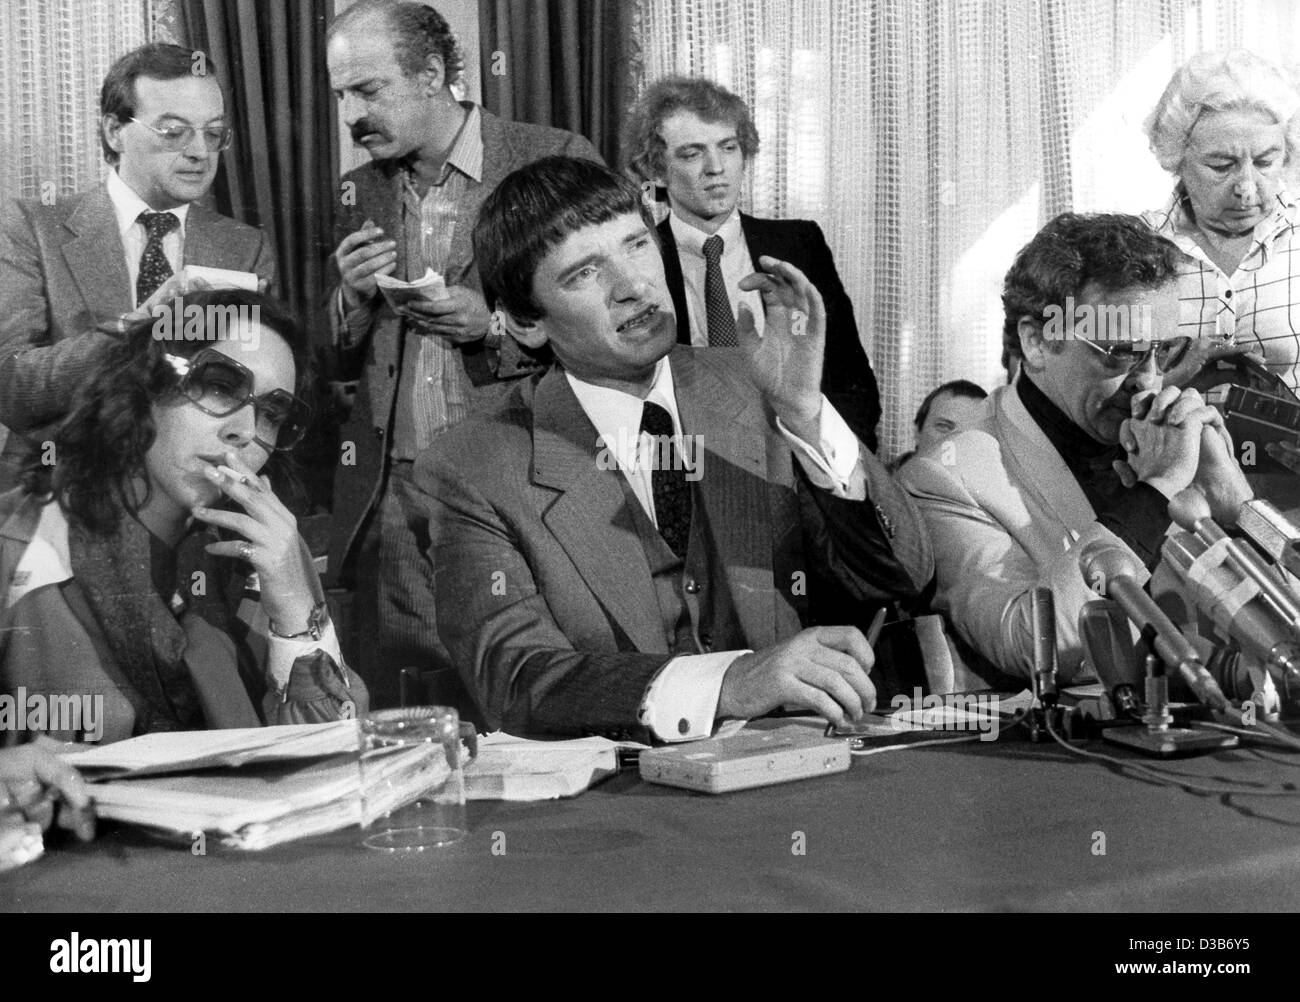 (dpa files) - Lawyers (L-R) Jutta Bahr-Jentges, Otto Schily, Heinz Heldmann and Klaus Frank discuss the suicide of RAF terrorists Andreas Baader, Gudrun Ensslin and Jan-Carl Raspe in front of representatives of the international press, in Bonn, West Germany, 18 October 1977. After the longest trial  Stock Photo